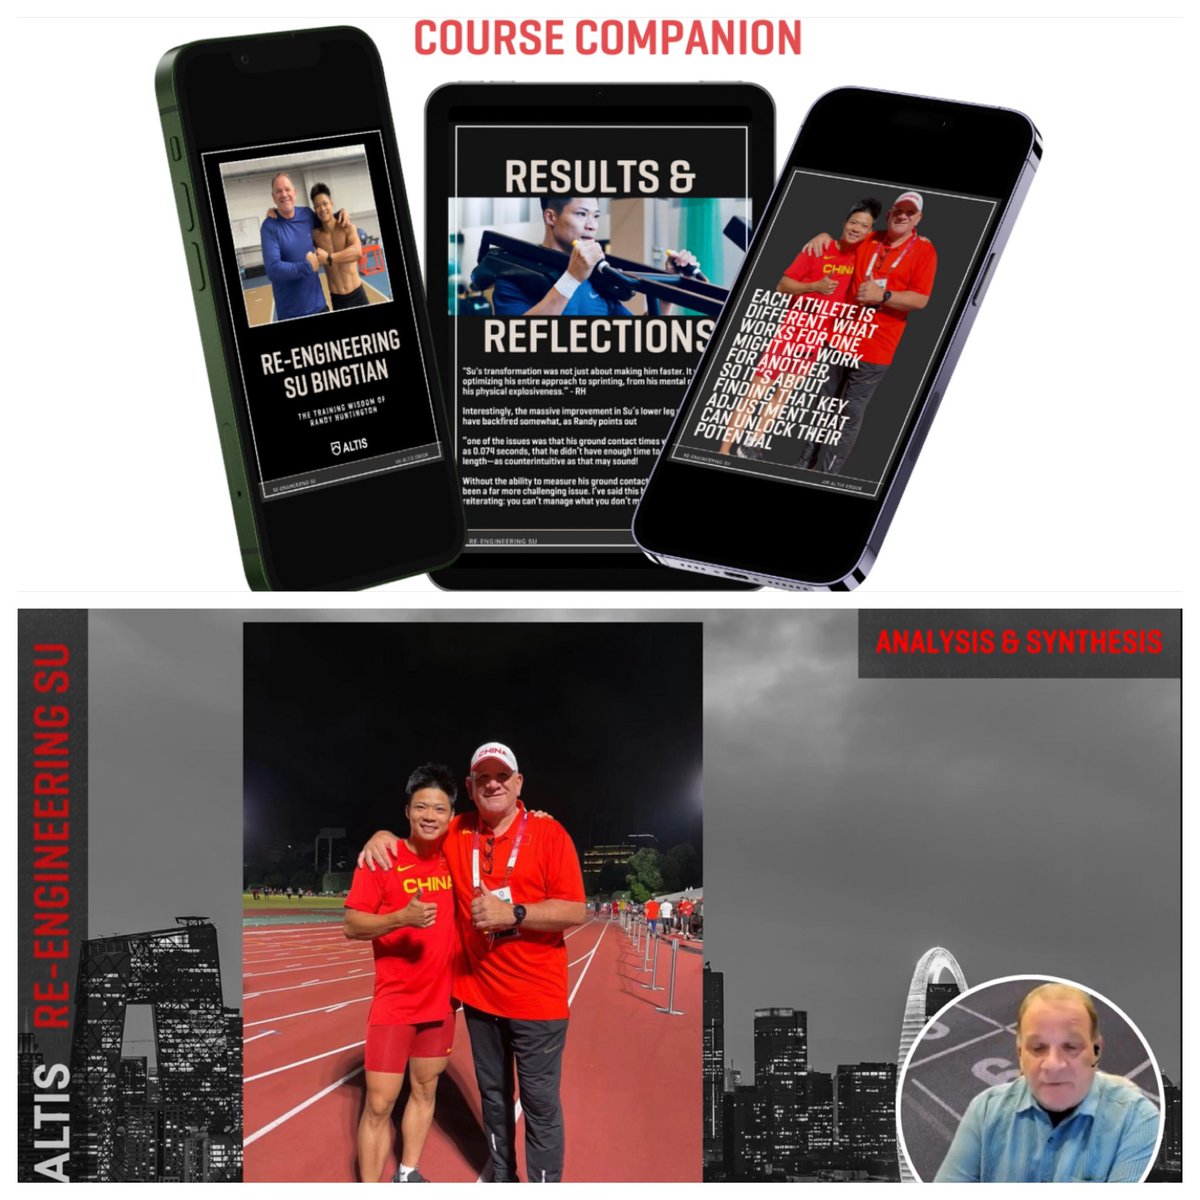 Really enjoying this @ALTIS course… lots of gems and insights… today is the last chance to get the early bird bonuses… all for just $49! Don’t miss out - @ALTIS @StuartMcMillan1 @CoachSanAndreas have put together a great resource w Randy!